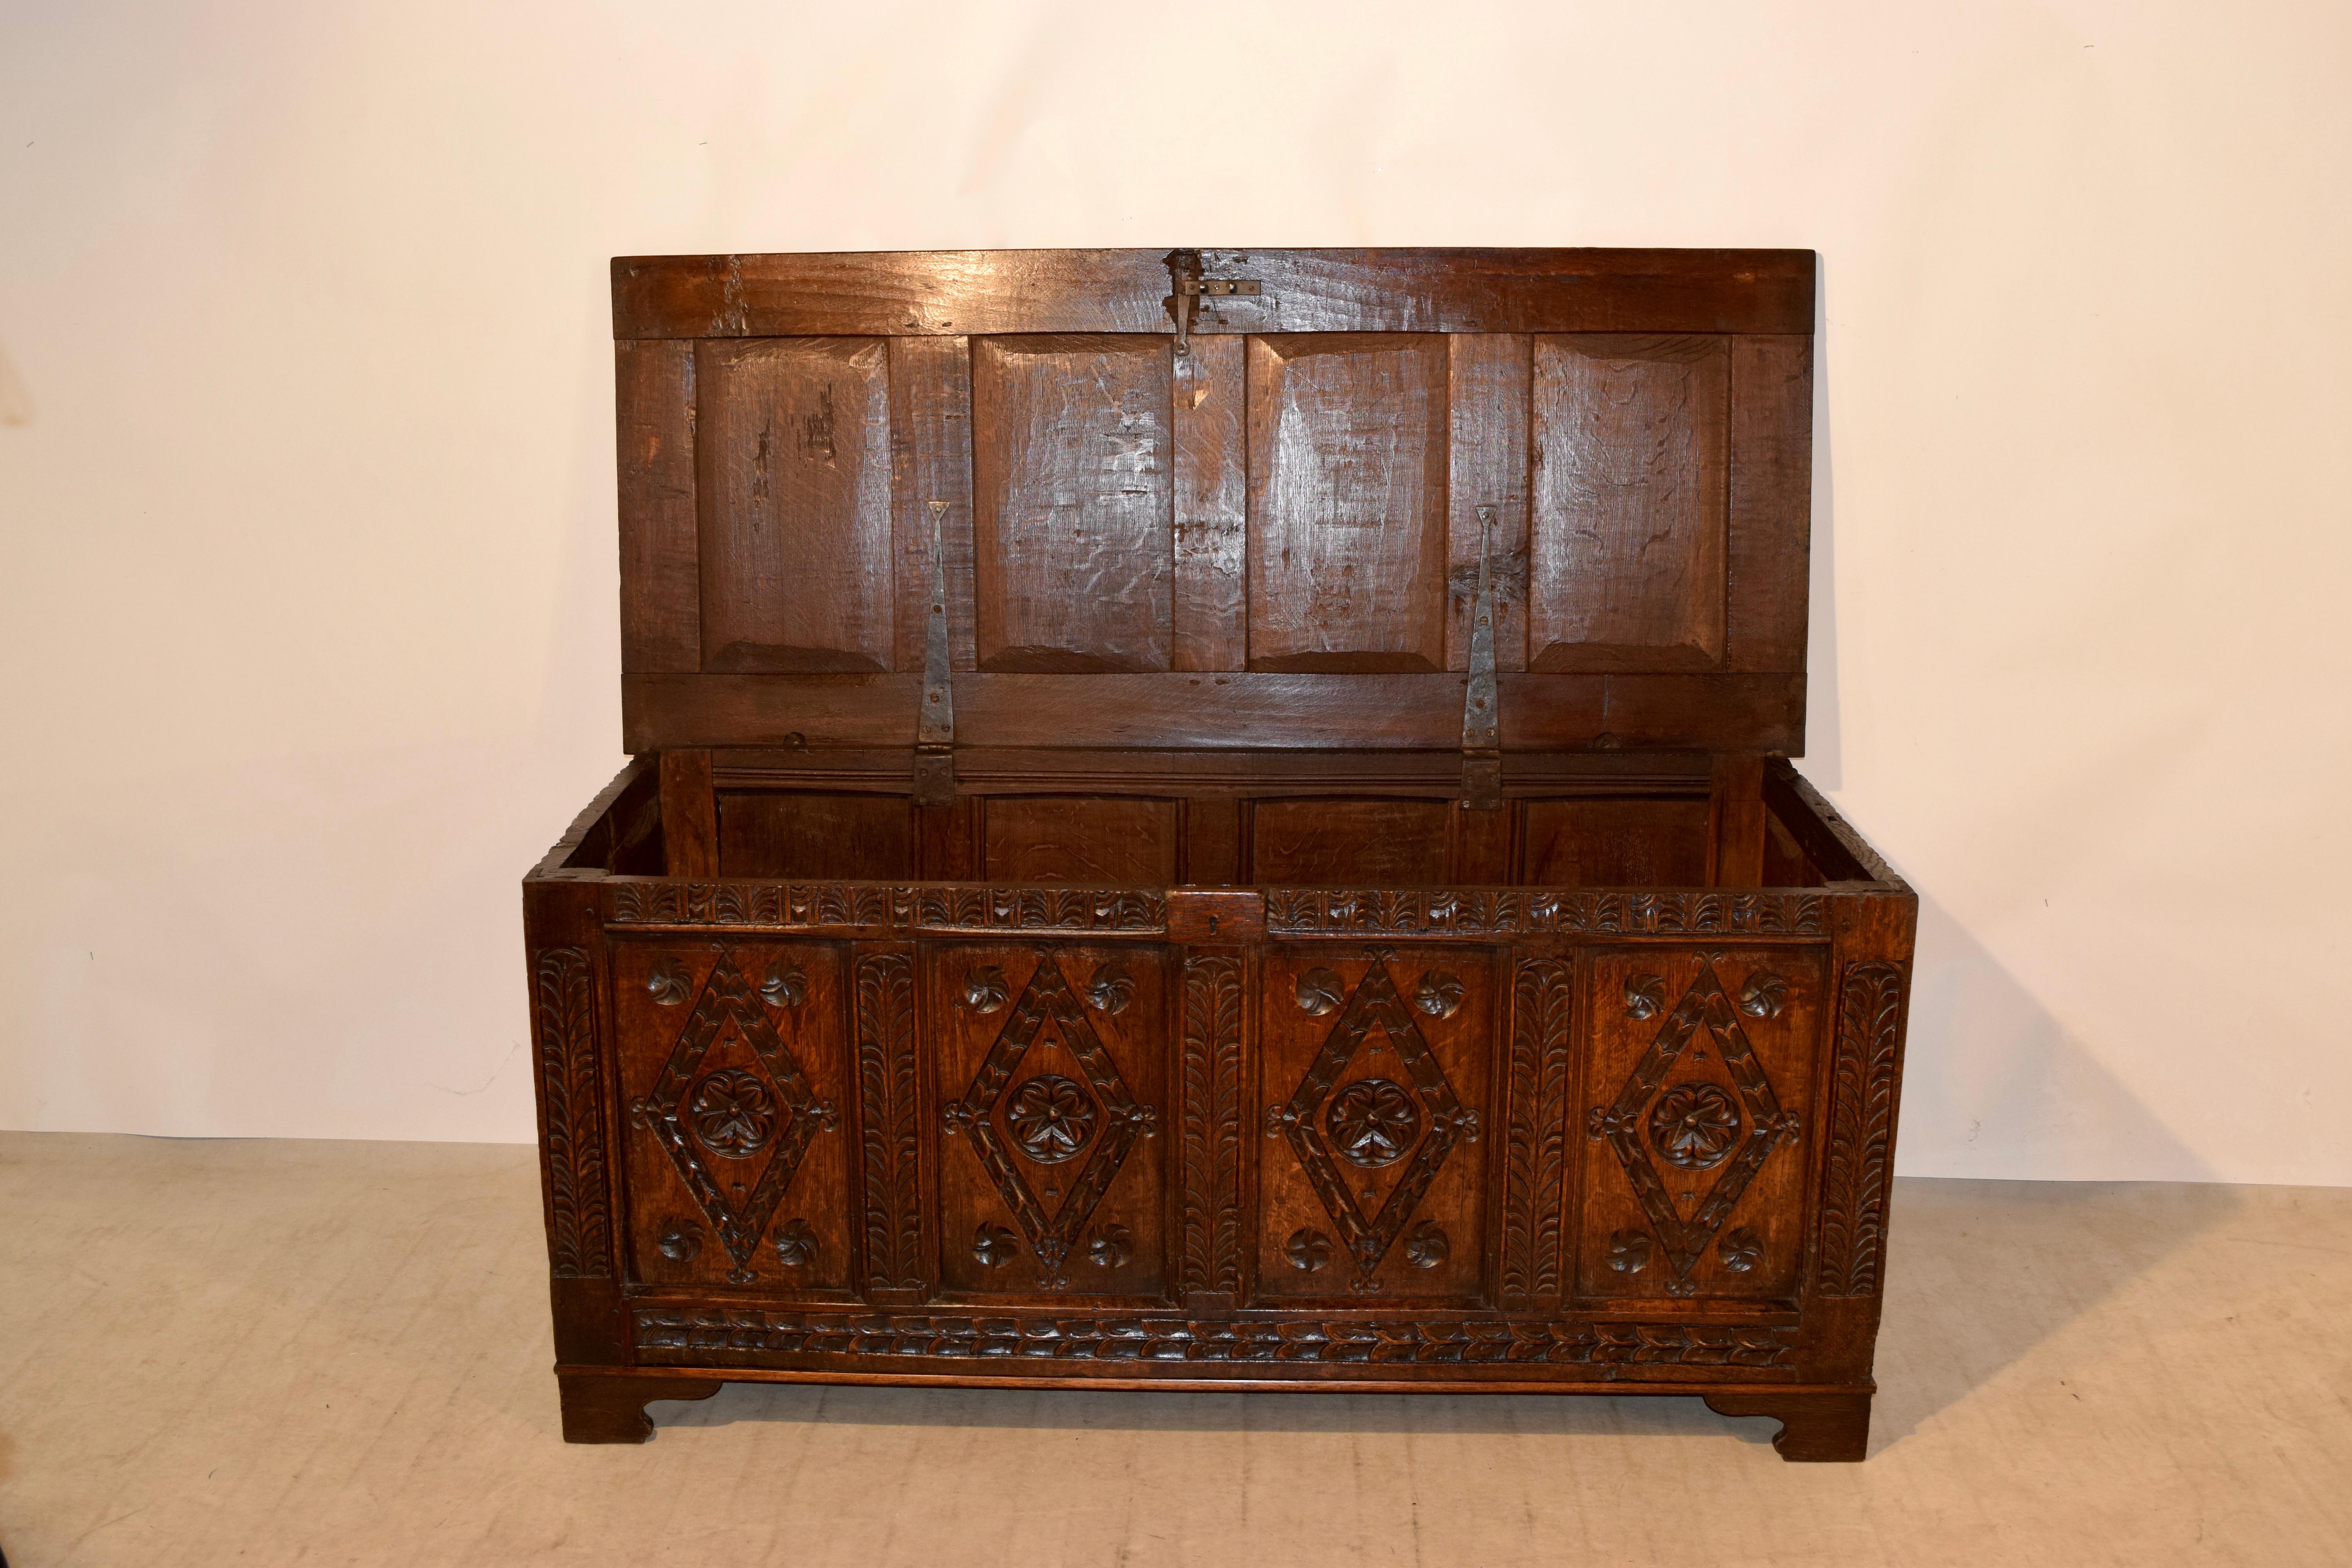 Hand-Carved Late 17th-Early 18th Century Oak Blanket Chest